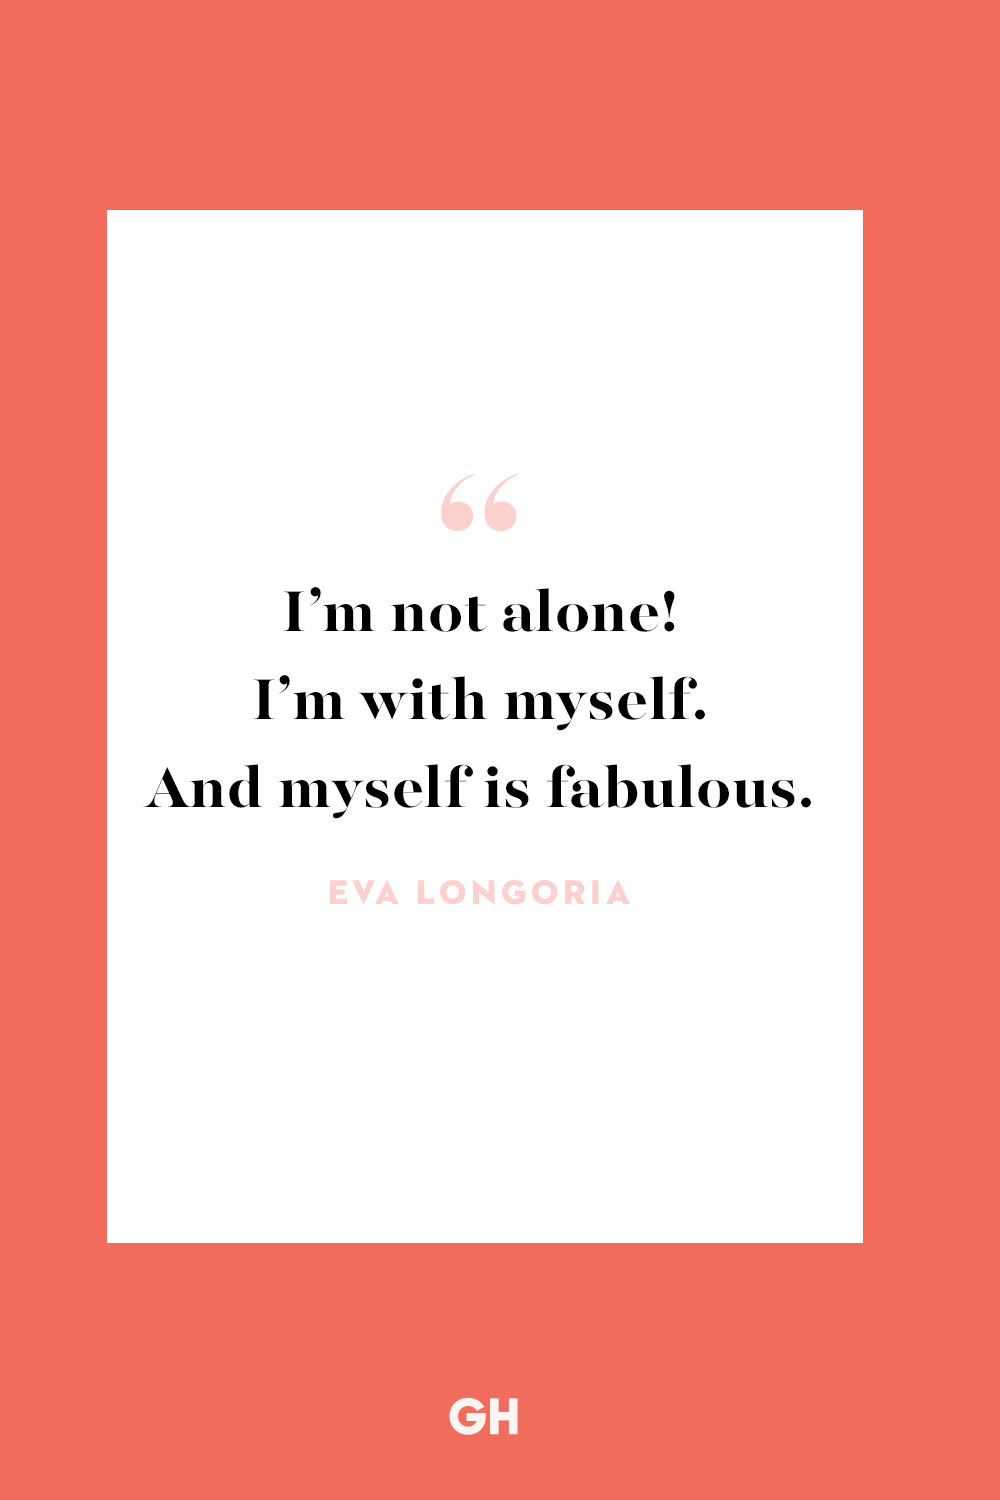 quotes about being single on holidays